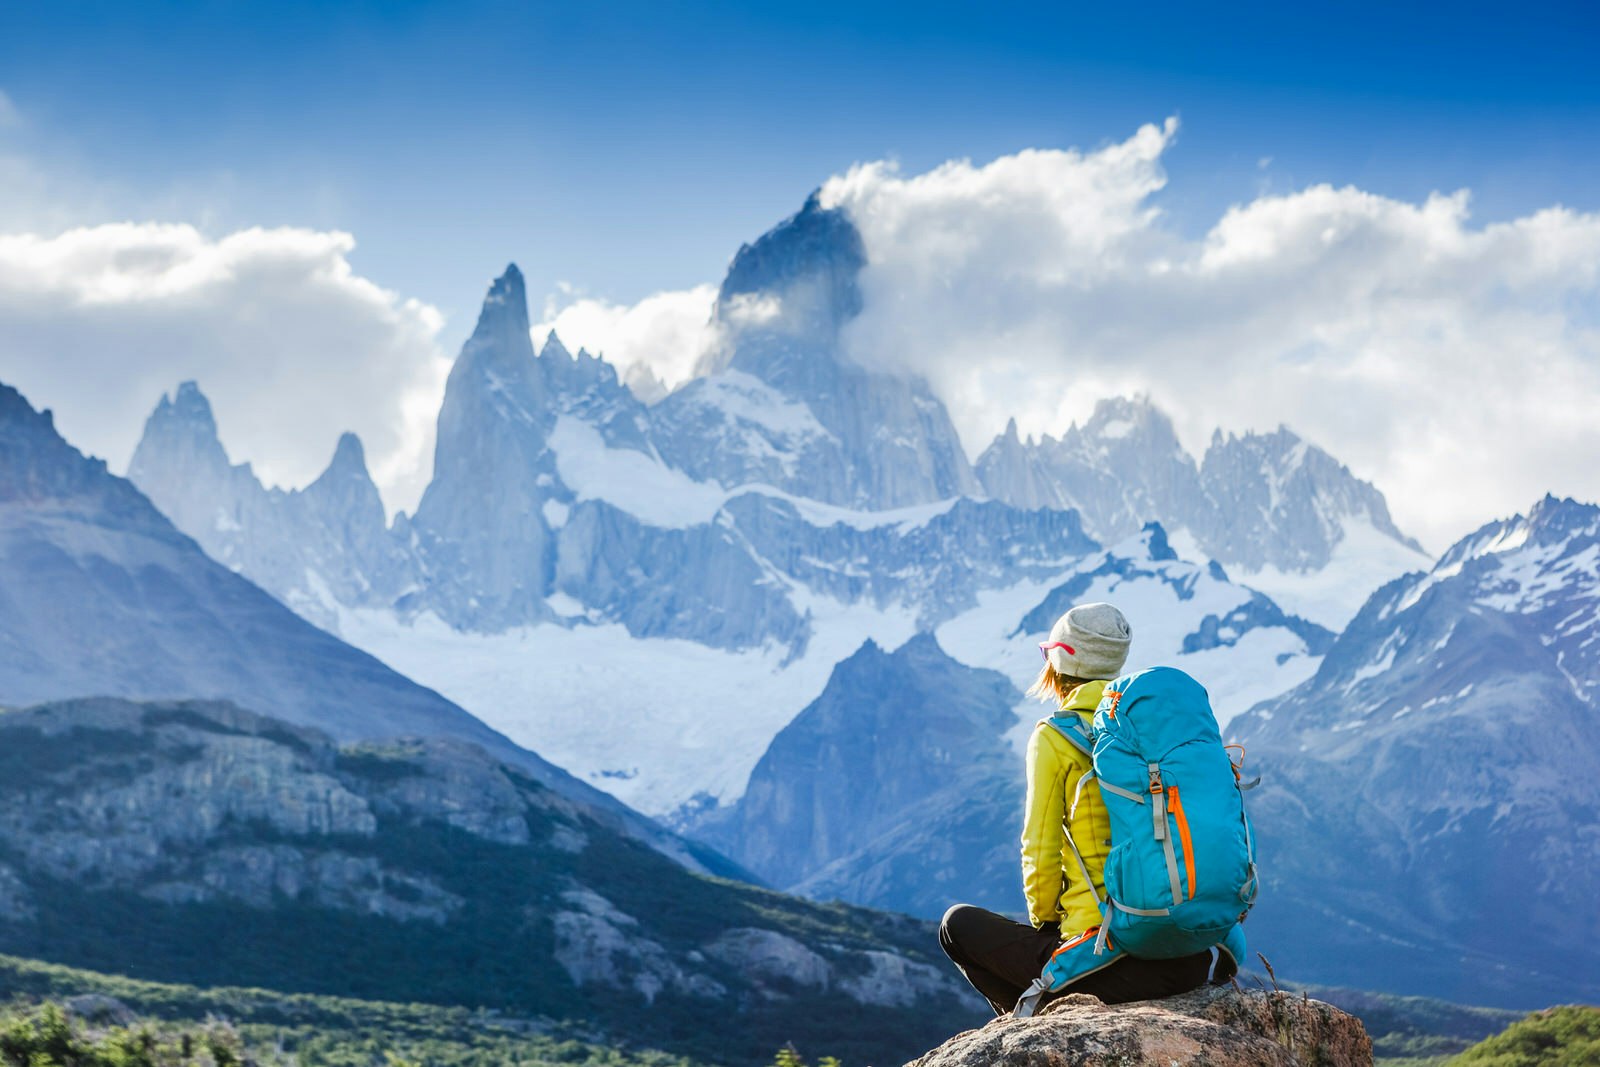 A woman in a yellow jacket, grey wool hat and blue backpack sits on a rock and looks up to the awe-inspiring jagged ridges and peaks of Mount Fitzroy.